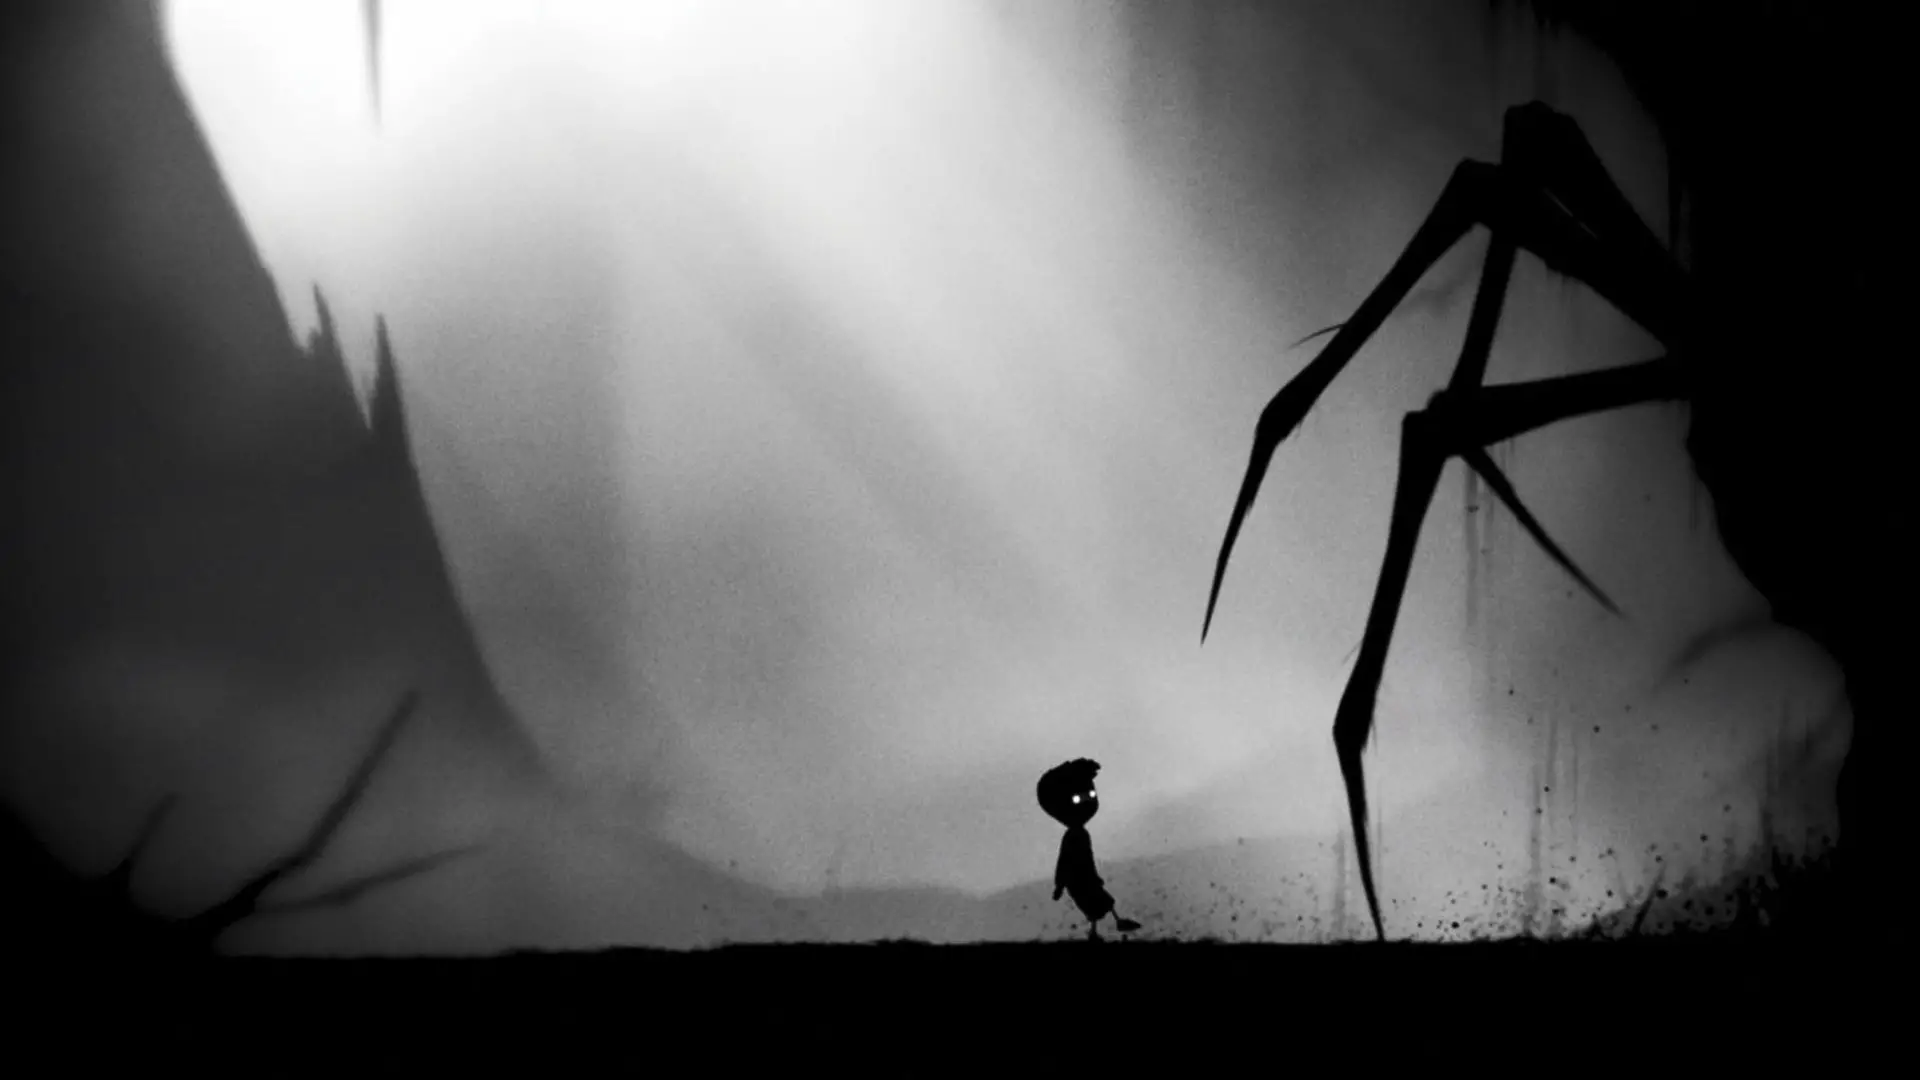 Videogame Android offline: LIMBO